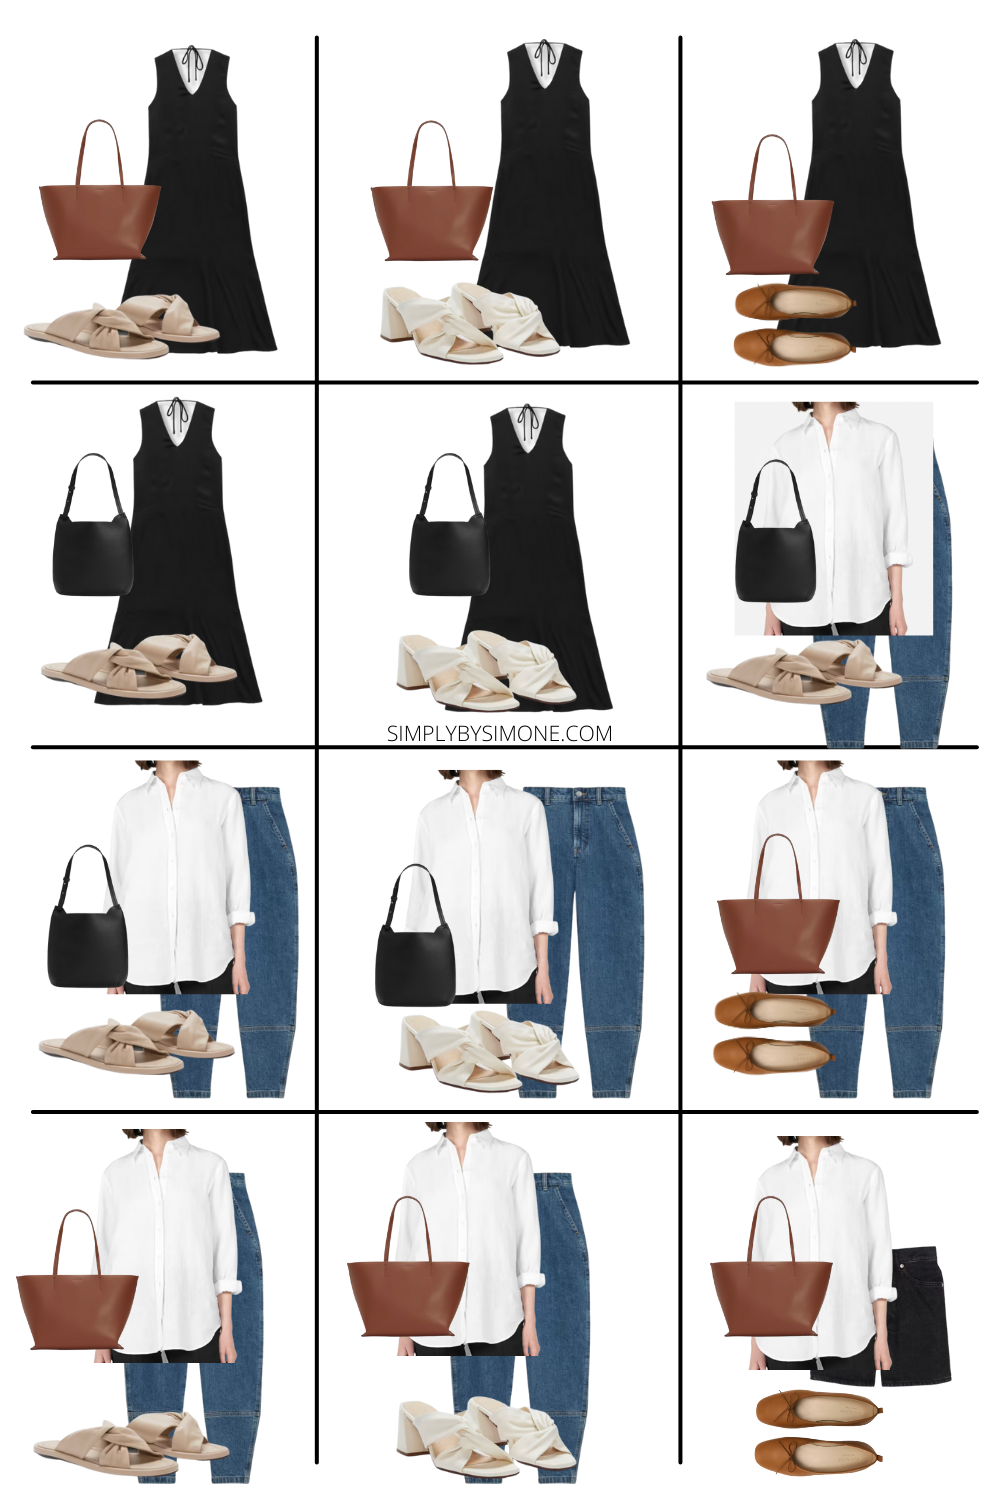 https://simplybysimone.com/wp-content/uploads/2022/06/Everlane-Summer-Capsule-Wardrobe-What-to-wear-this-Summer-2023-Looks-37-48.png